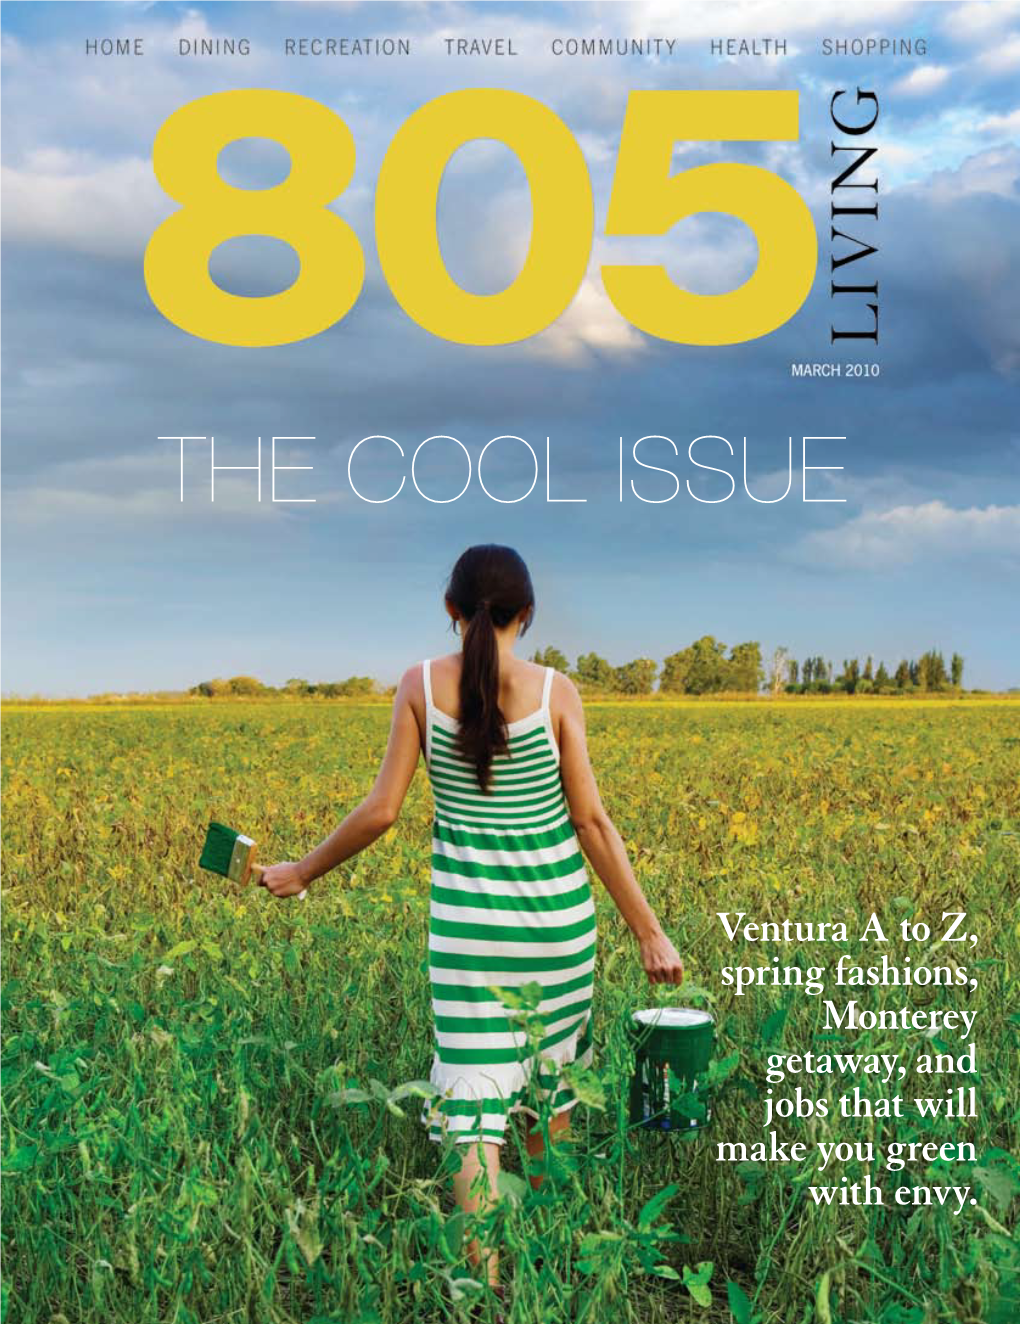 The Cool Issue